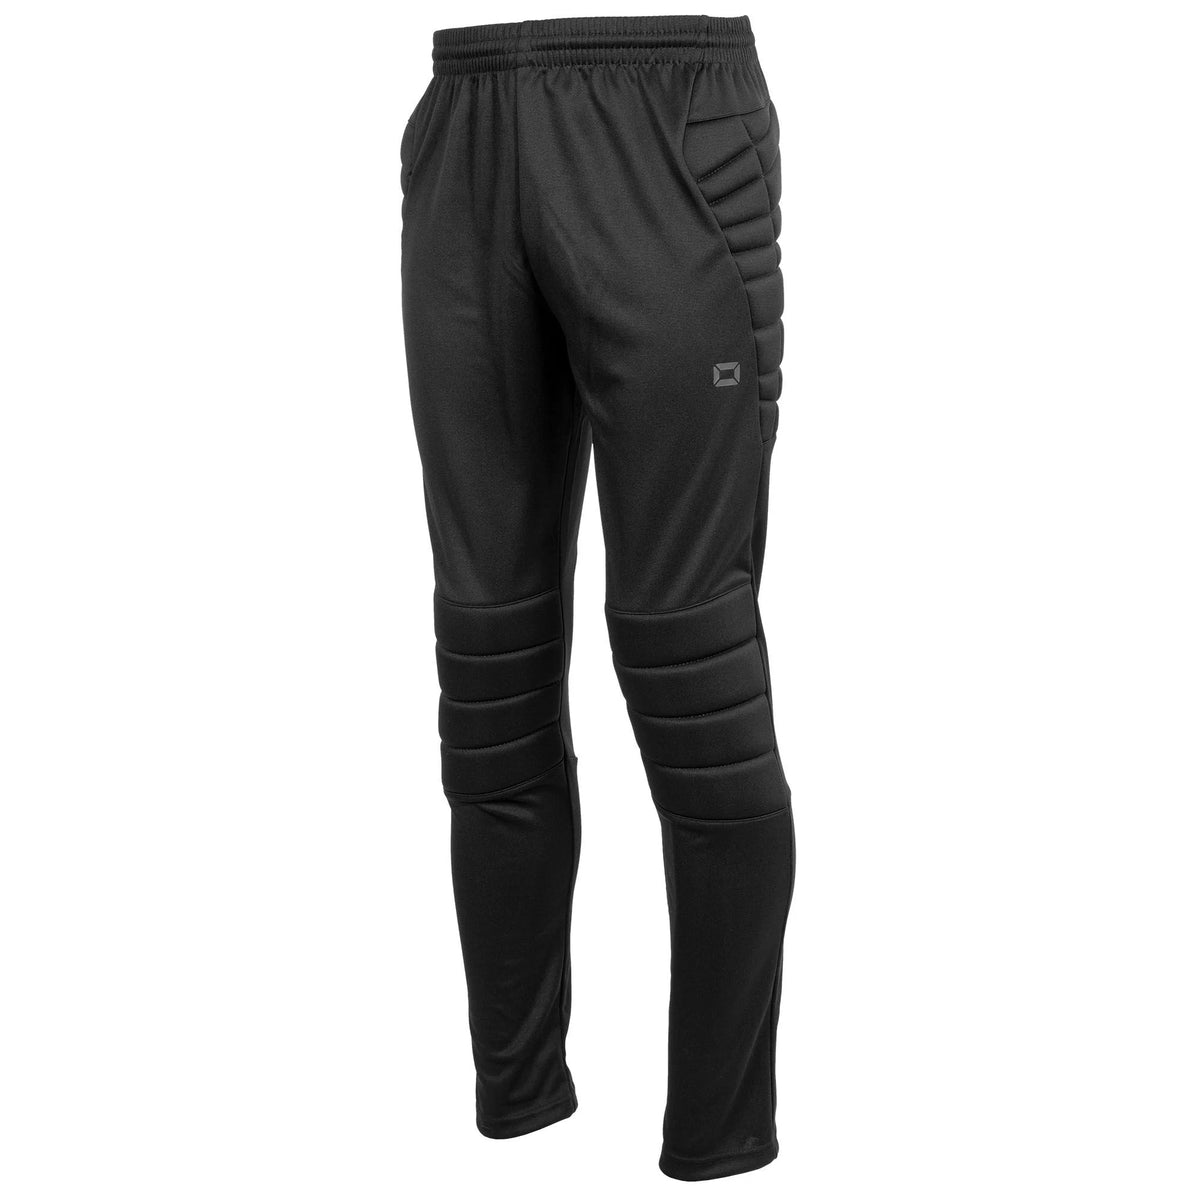 Chester Goalkeeper Pants in Adult